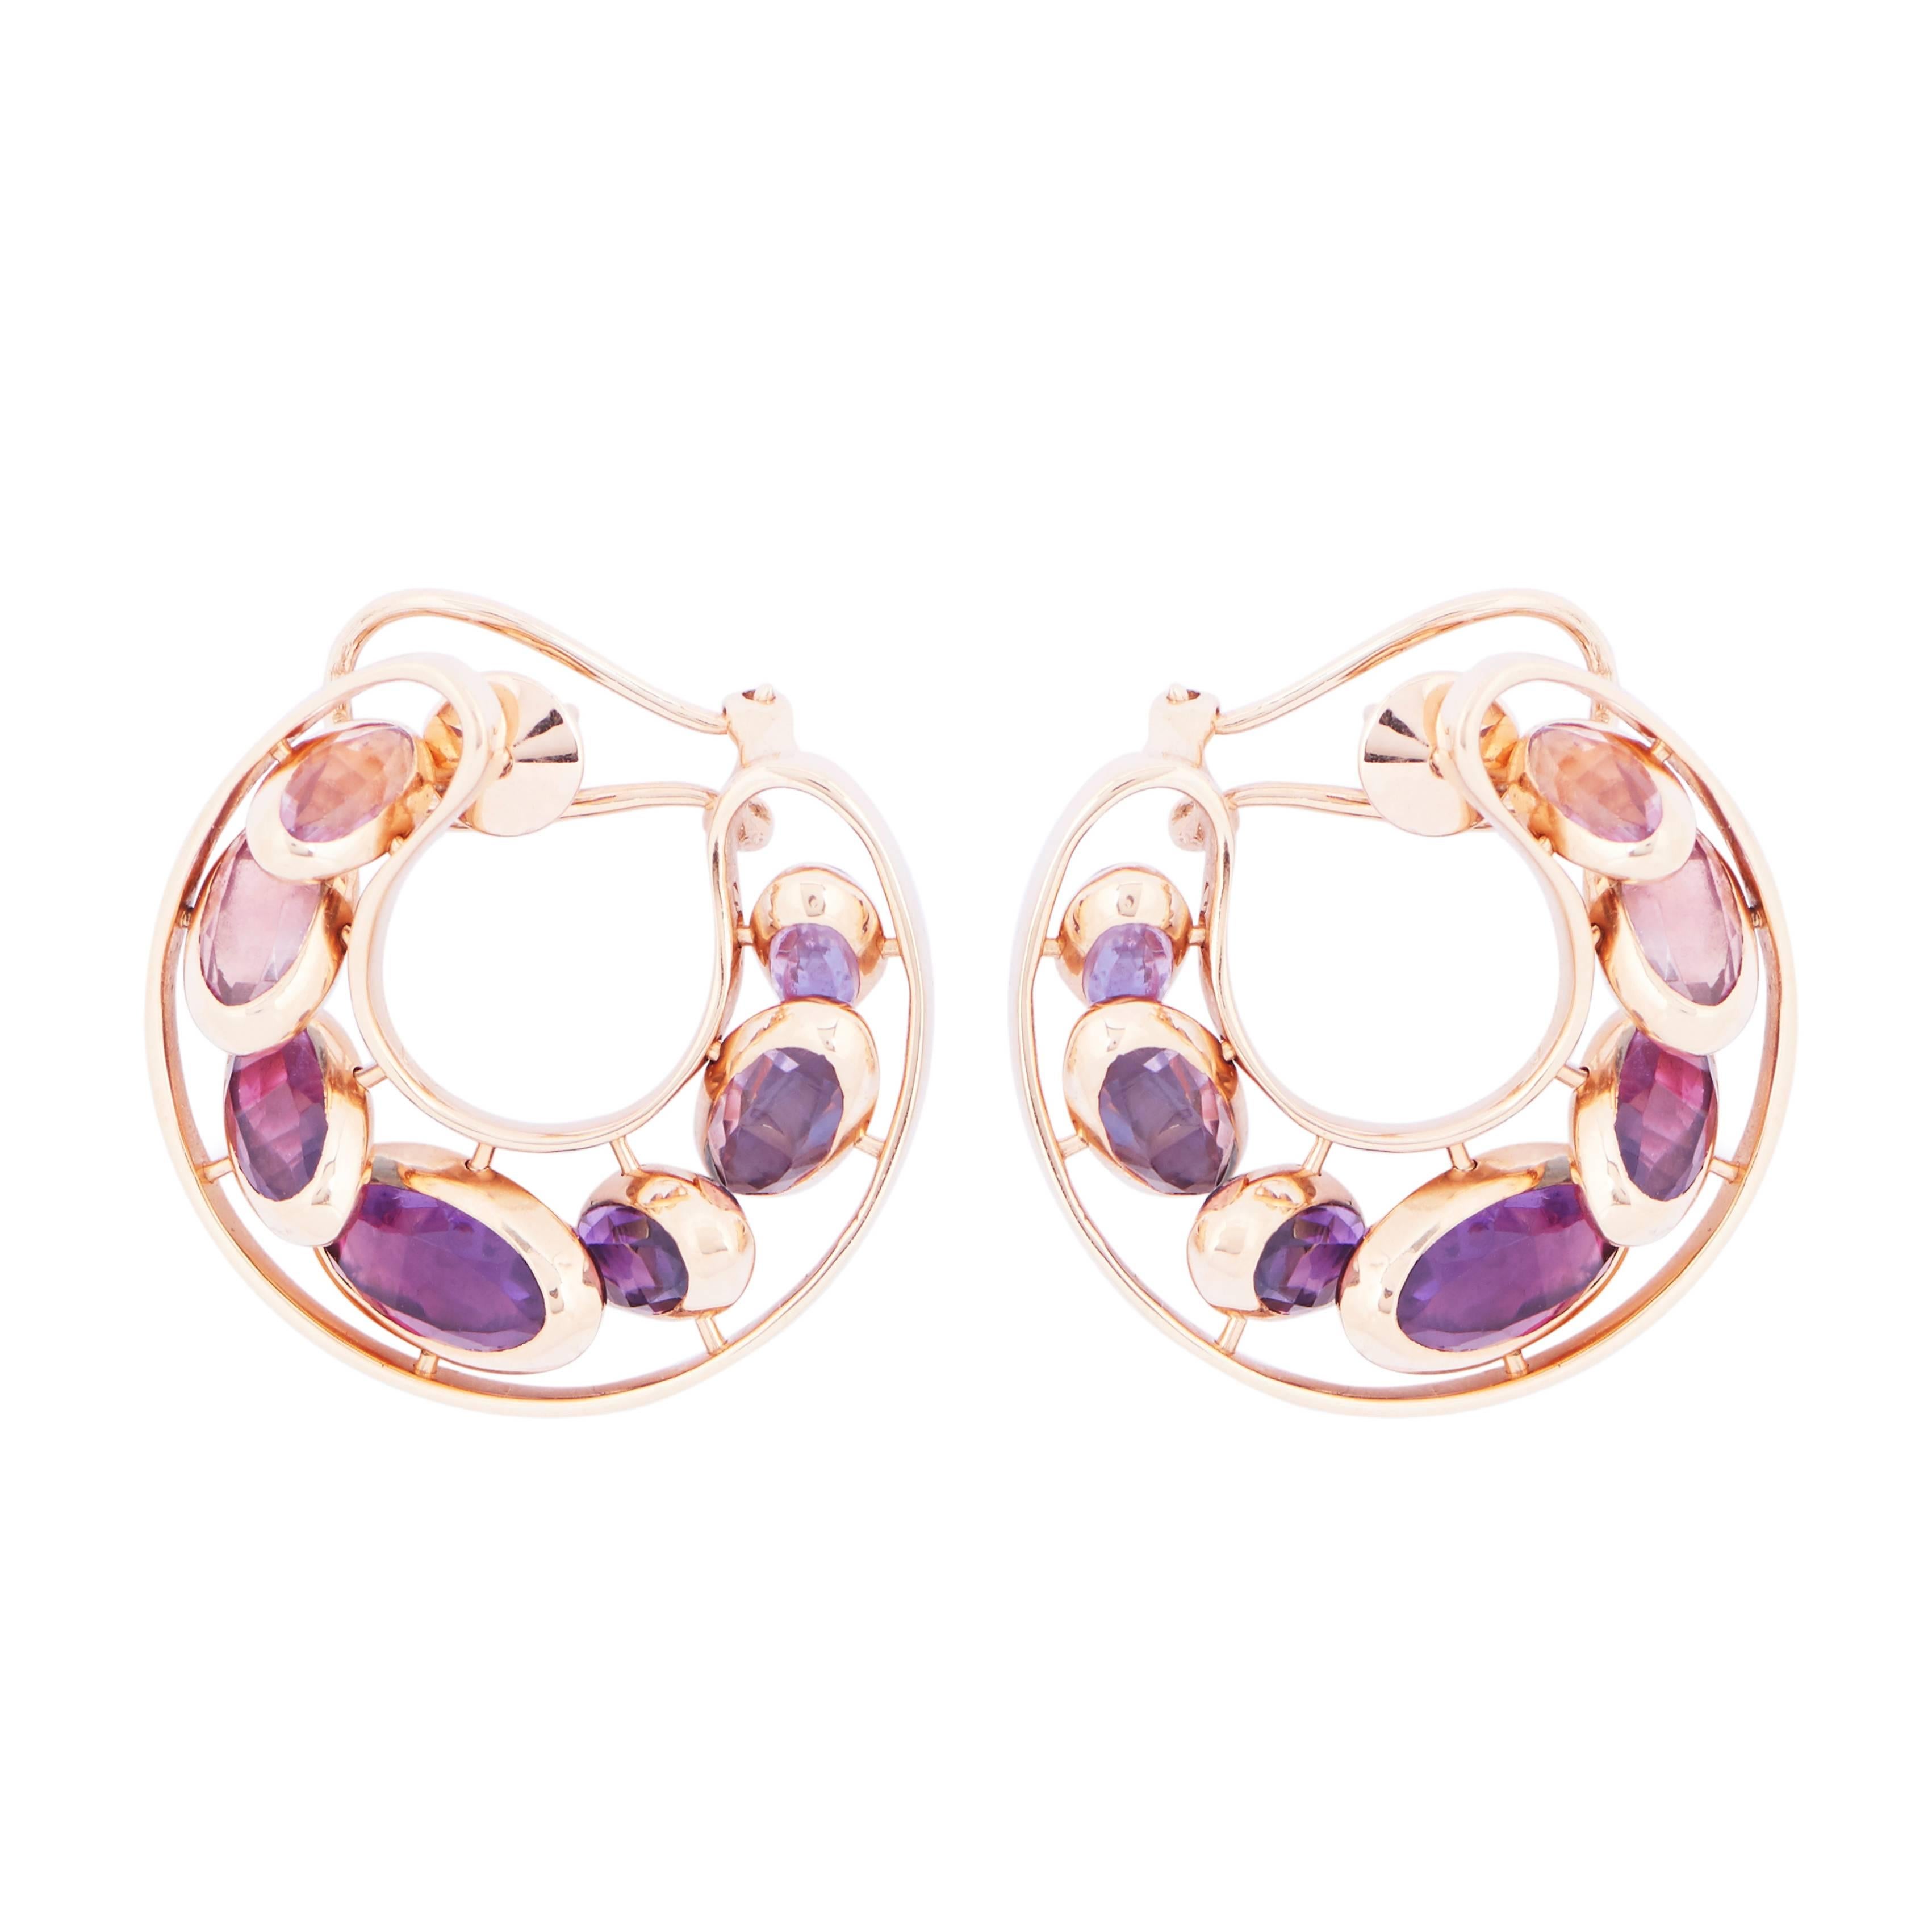 This pair of Reversible Hoop Earrings, from the French Jewelry brand Marie Mas, is made in 18 Karat Rose Gold. All the stones can move like dominos, from one side to the other, from a shade of blue to a shade of purple. You can turn them to choose